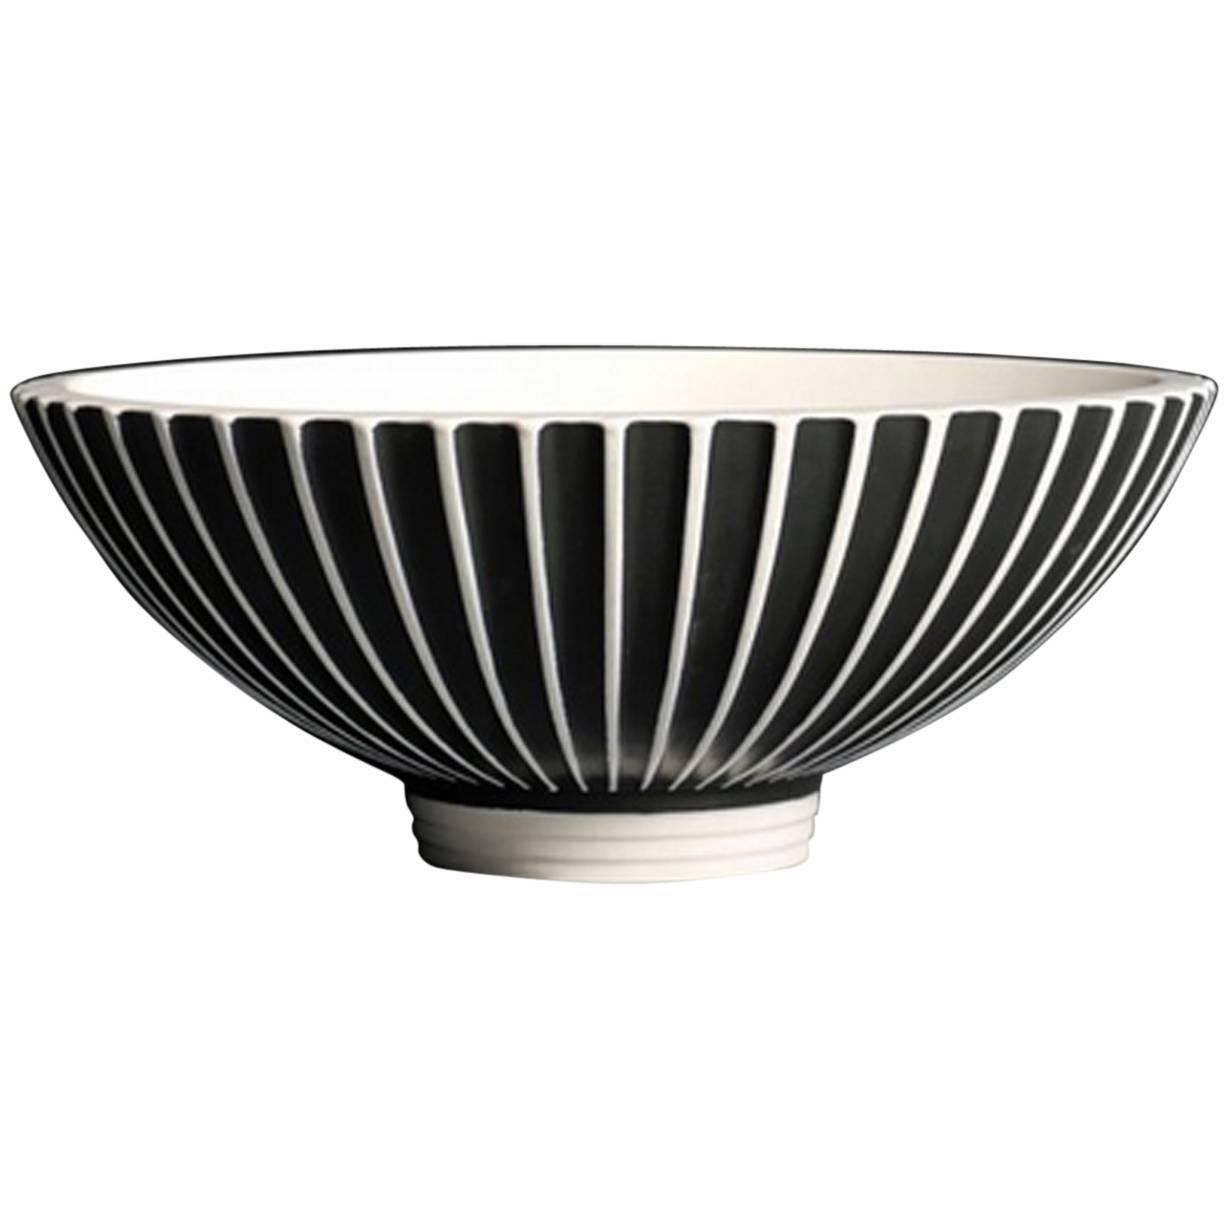 Black and White Ceramic Art Deco Bowl by Norman Wilson